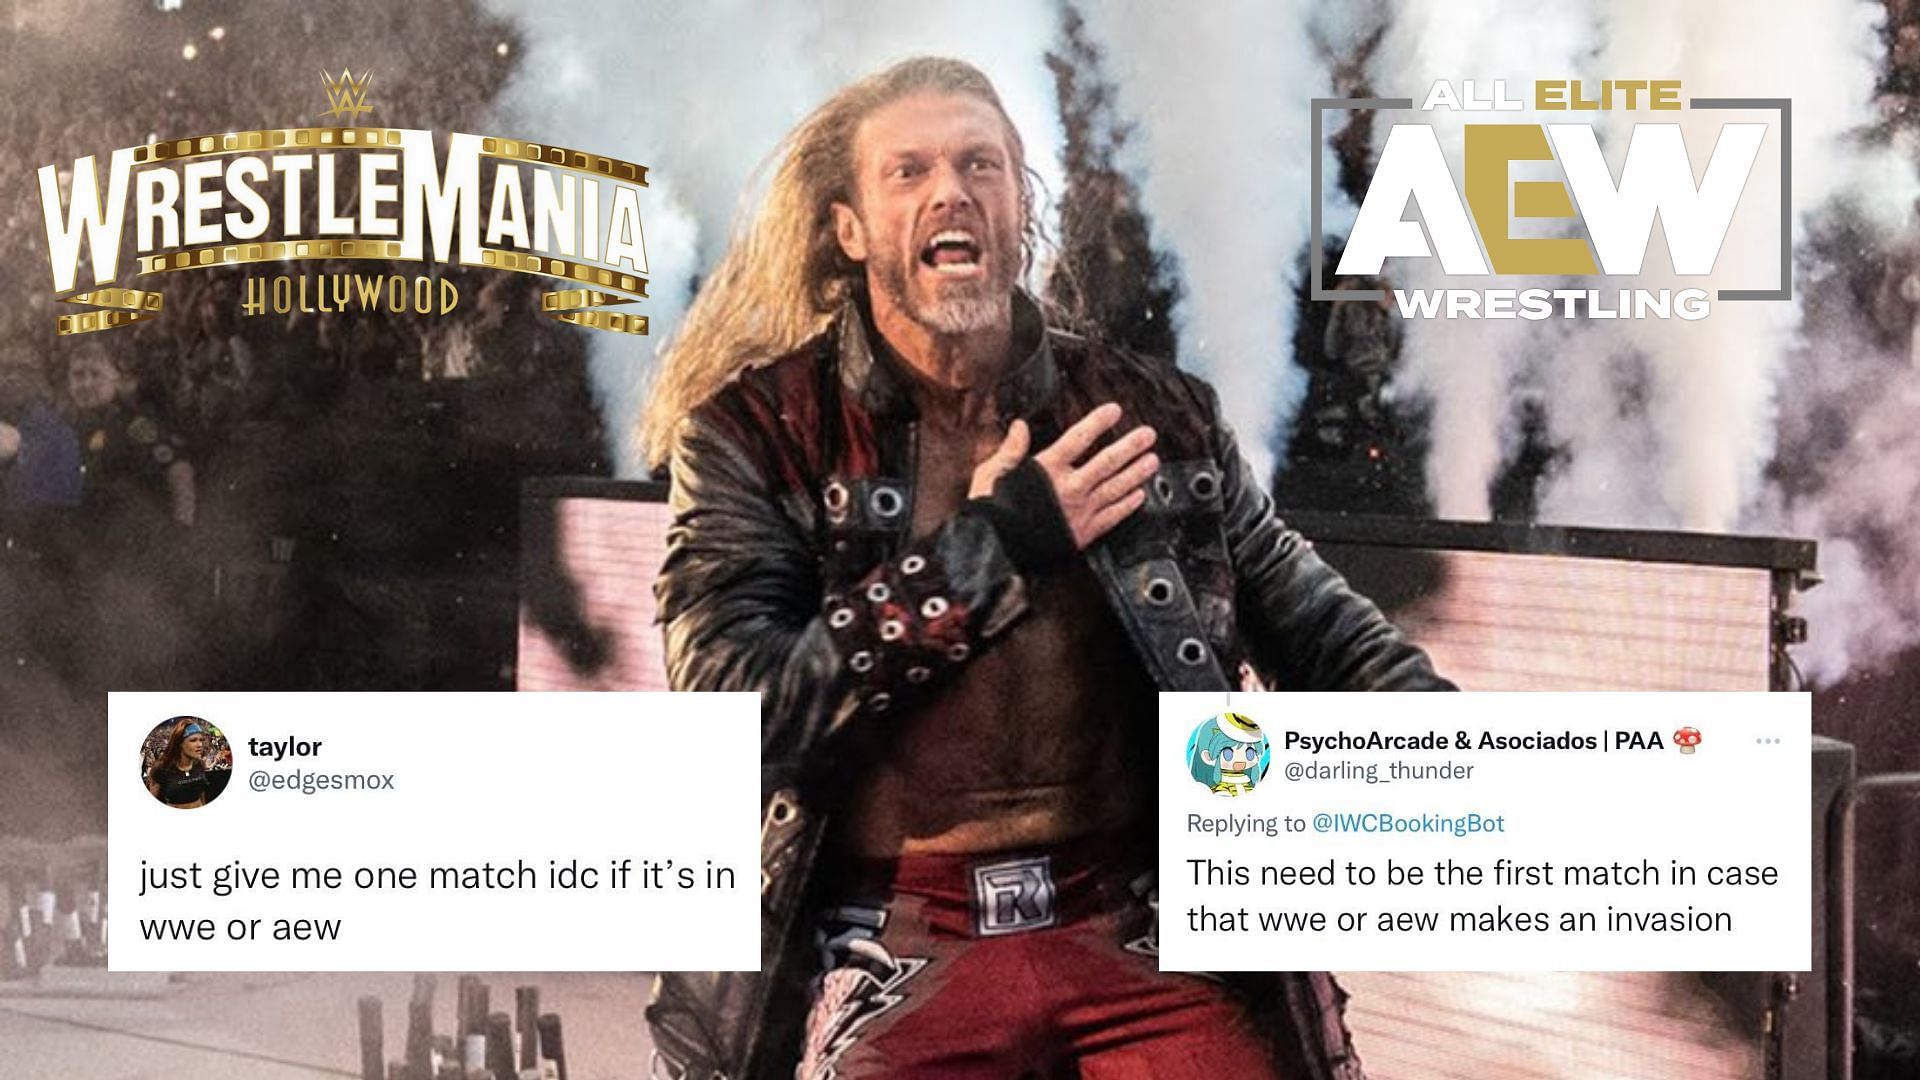 Fans want to see a top AEW star face Edge at WrestleMania next year